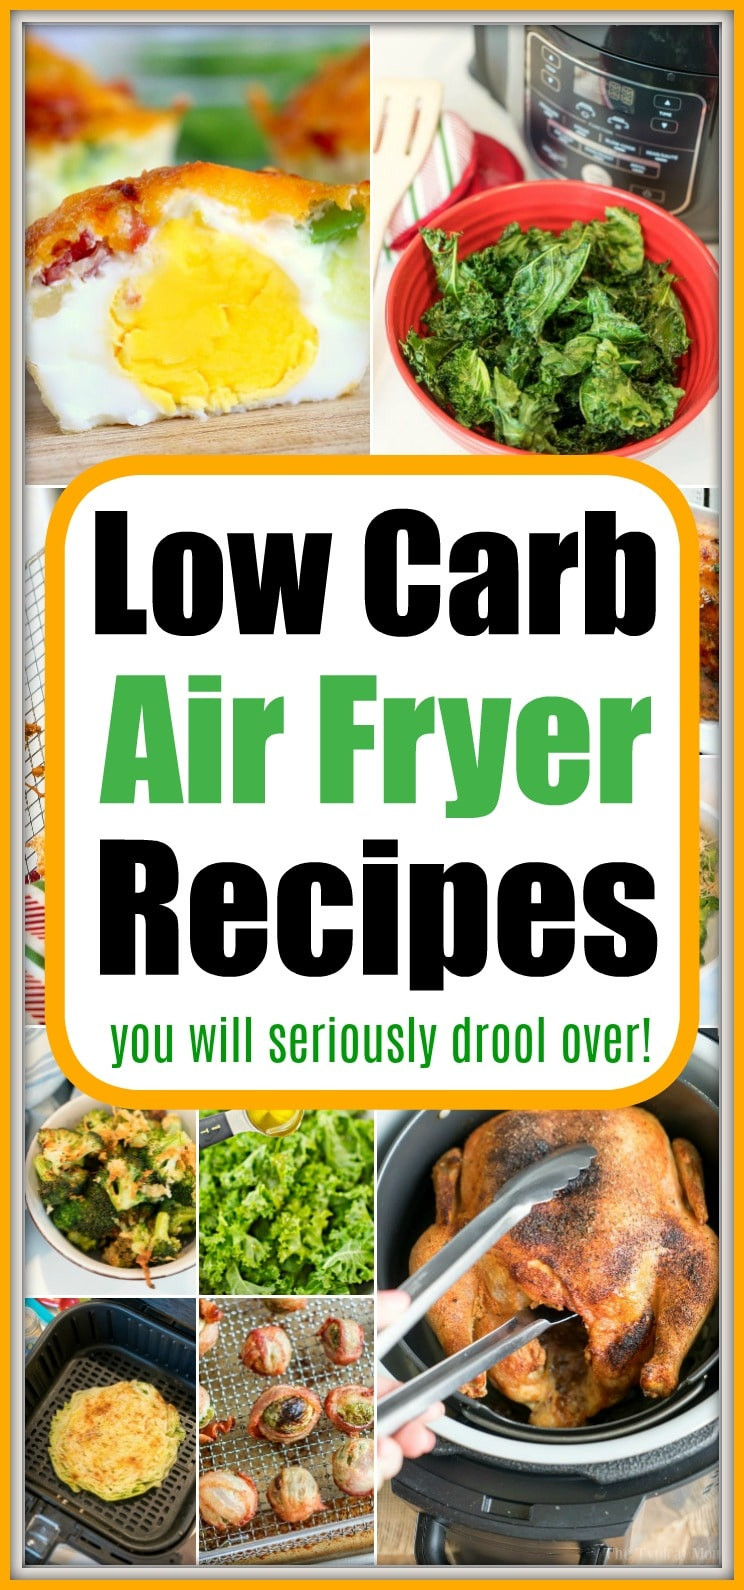 Low Carb Air Fryer Recipes
 Low Carb Air Fryer Recipes · The Typical Mom